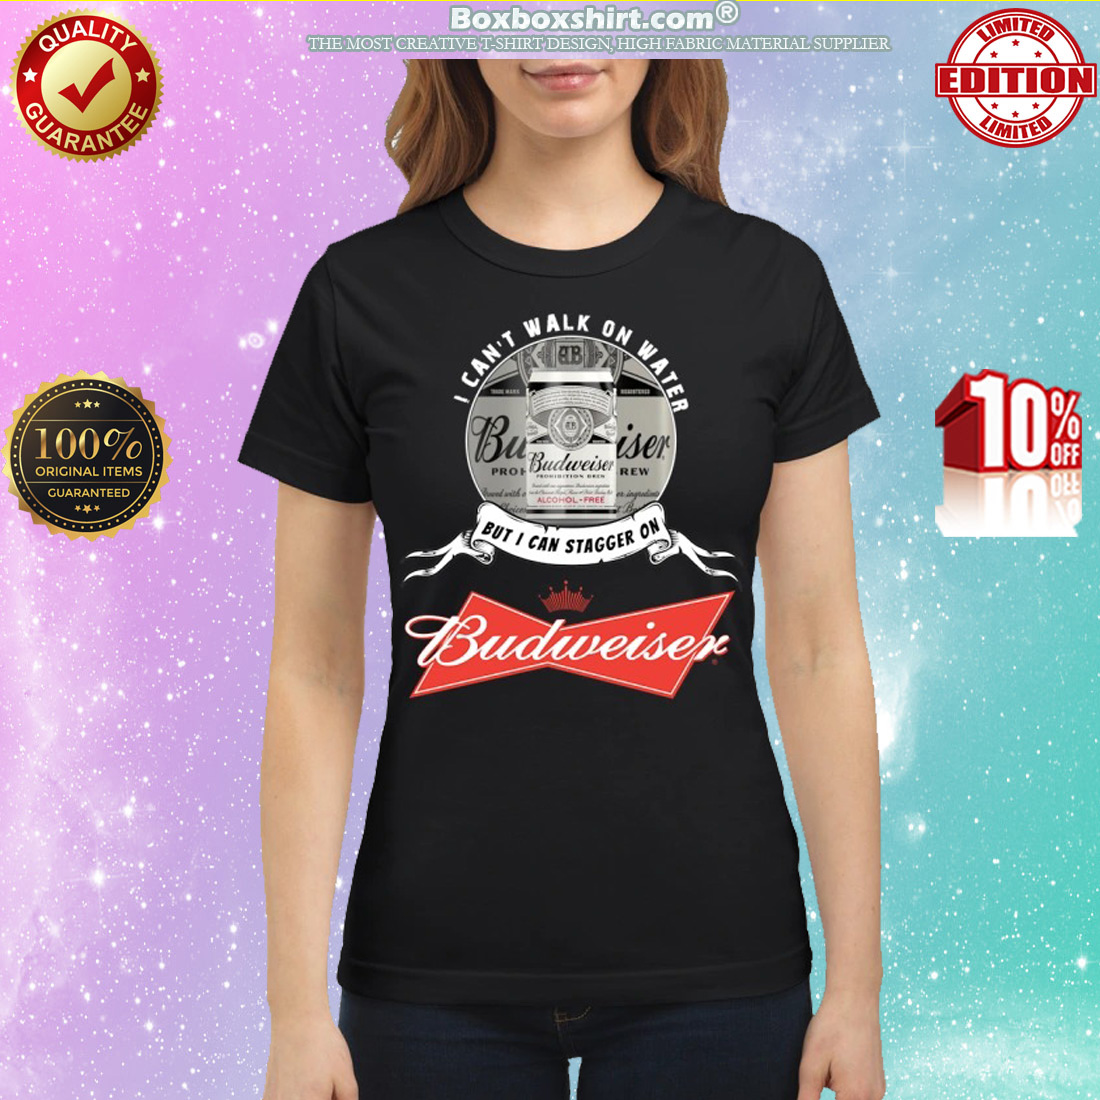 I can't walk on water but I can stagger on Budweiser classic shirt